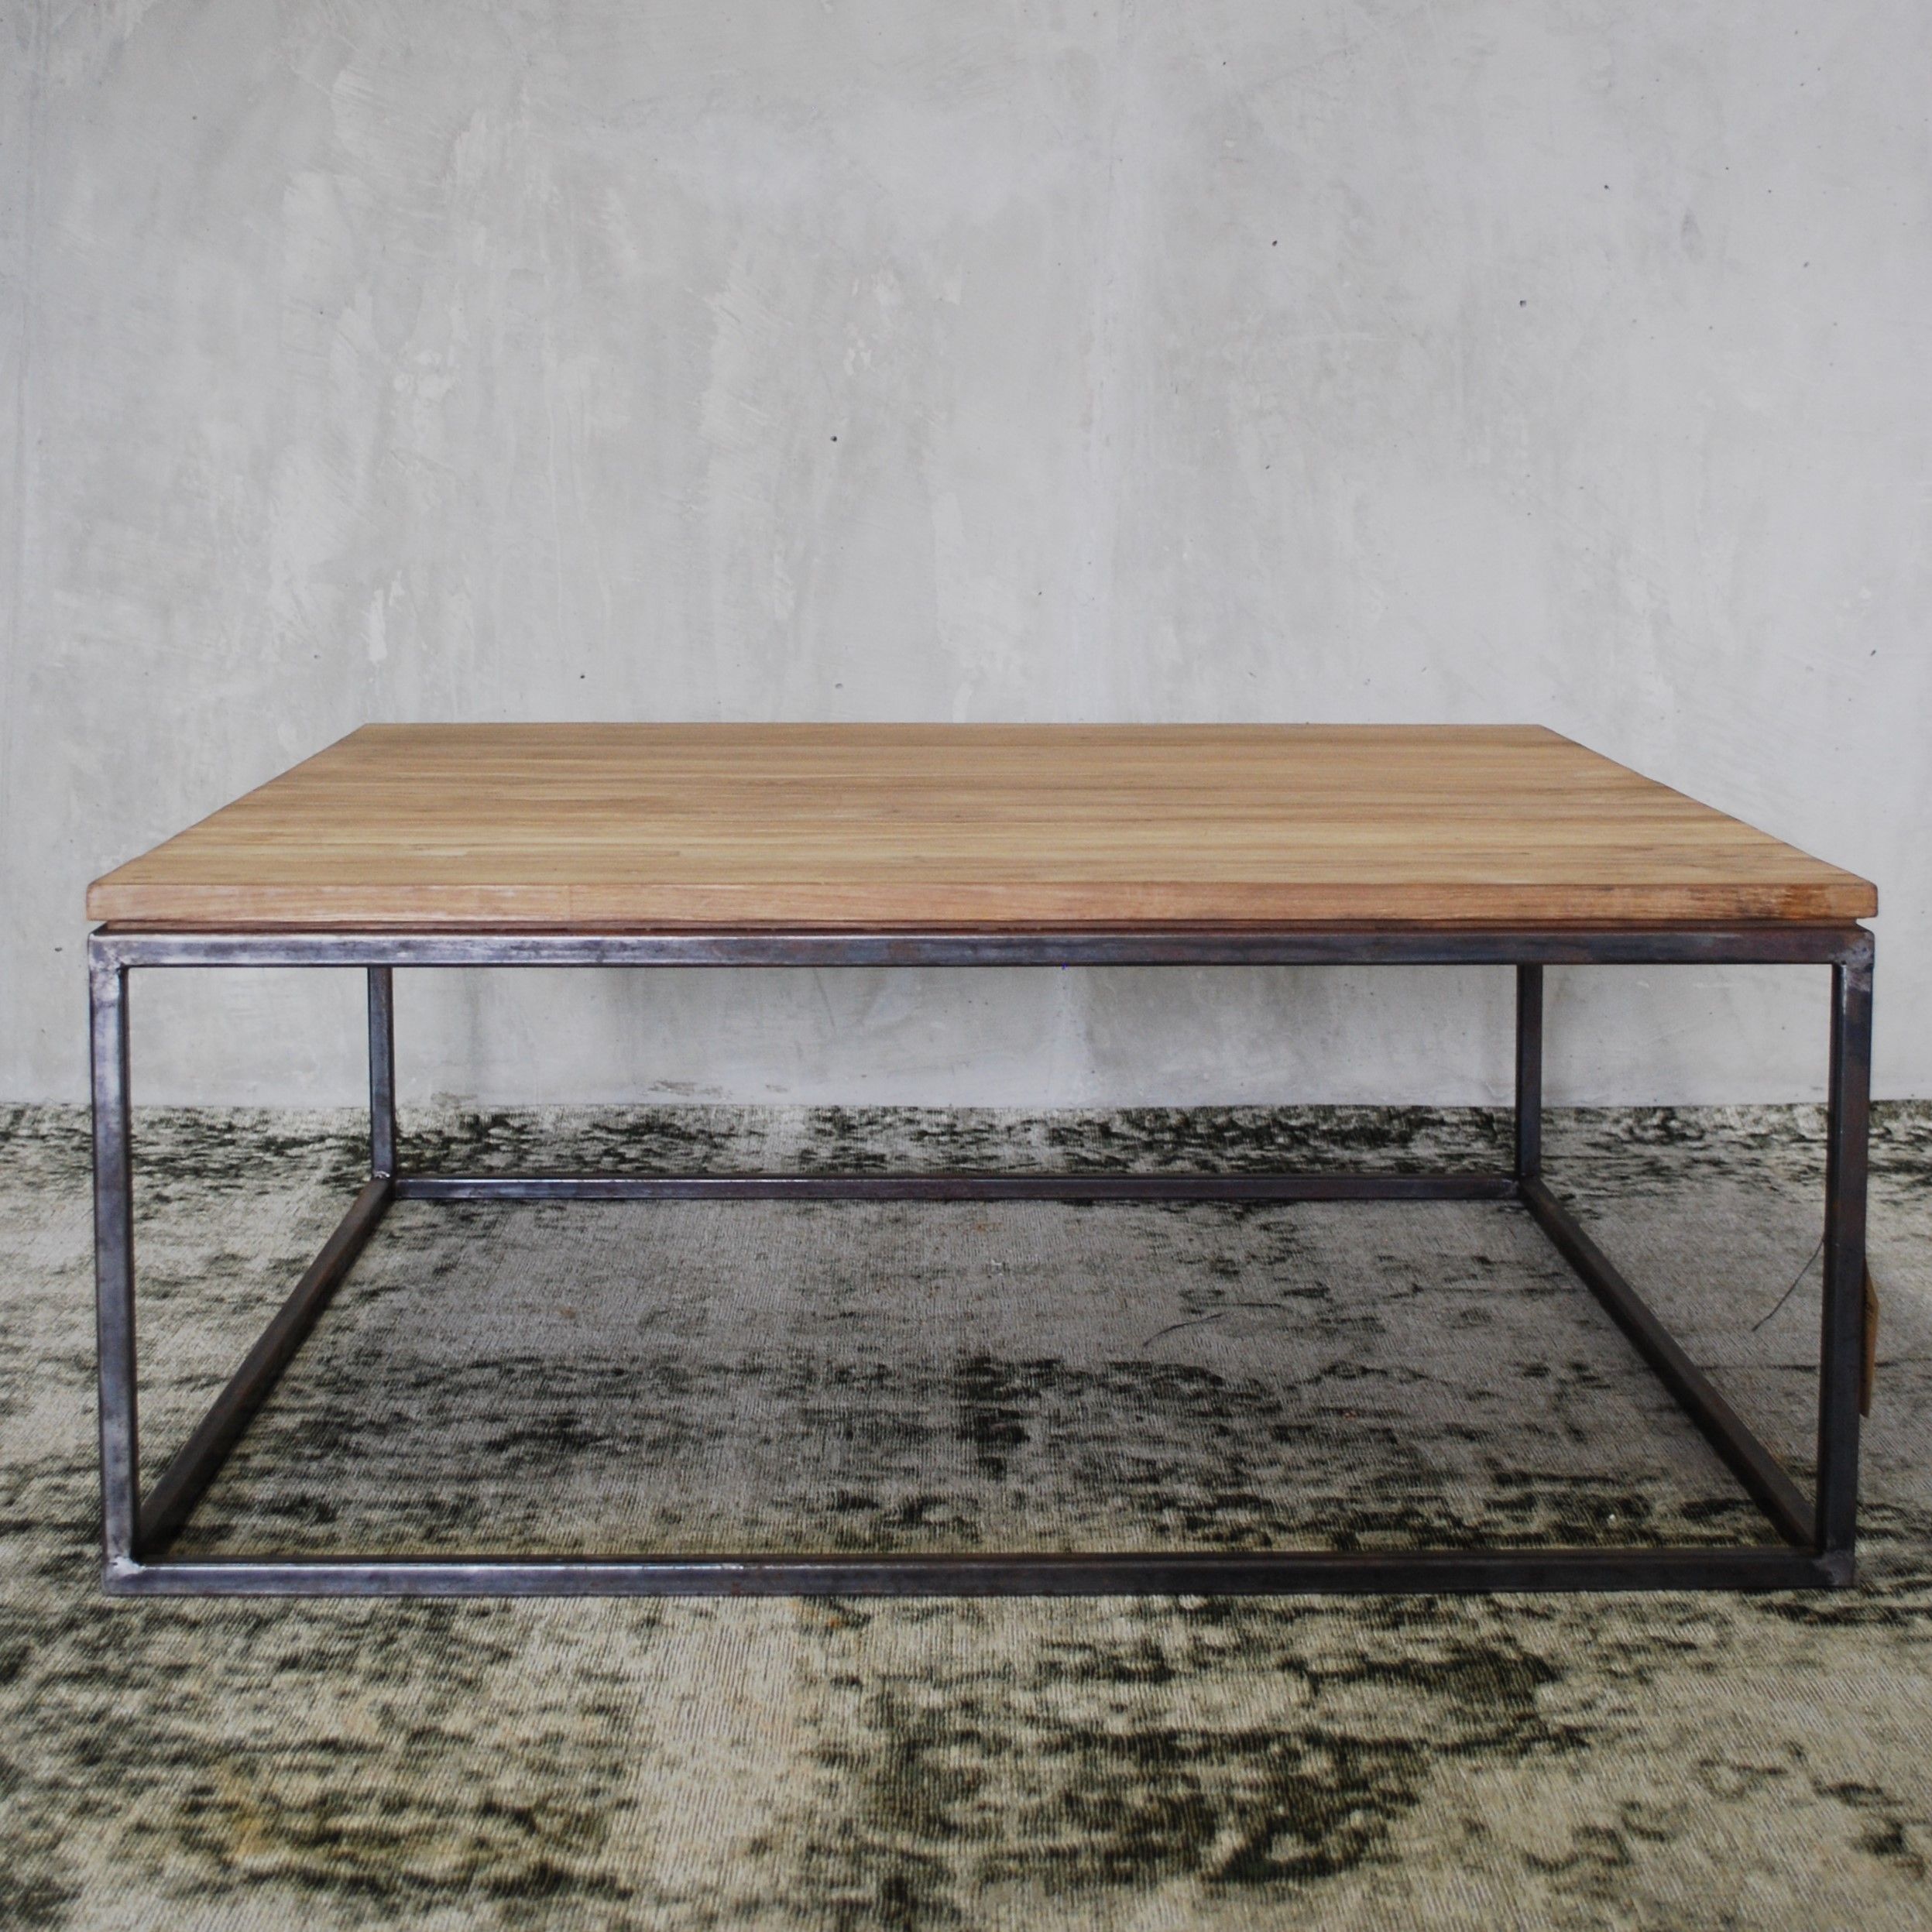 Reclaimed Teak Wood Coffee Table With Iron Leg Throughout Oak Wood And Metal Legs Coffee Tables (View 1 of 15)